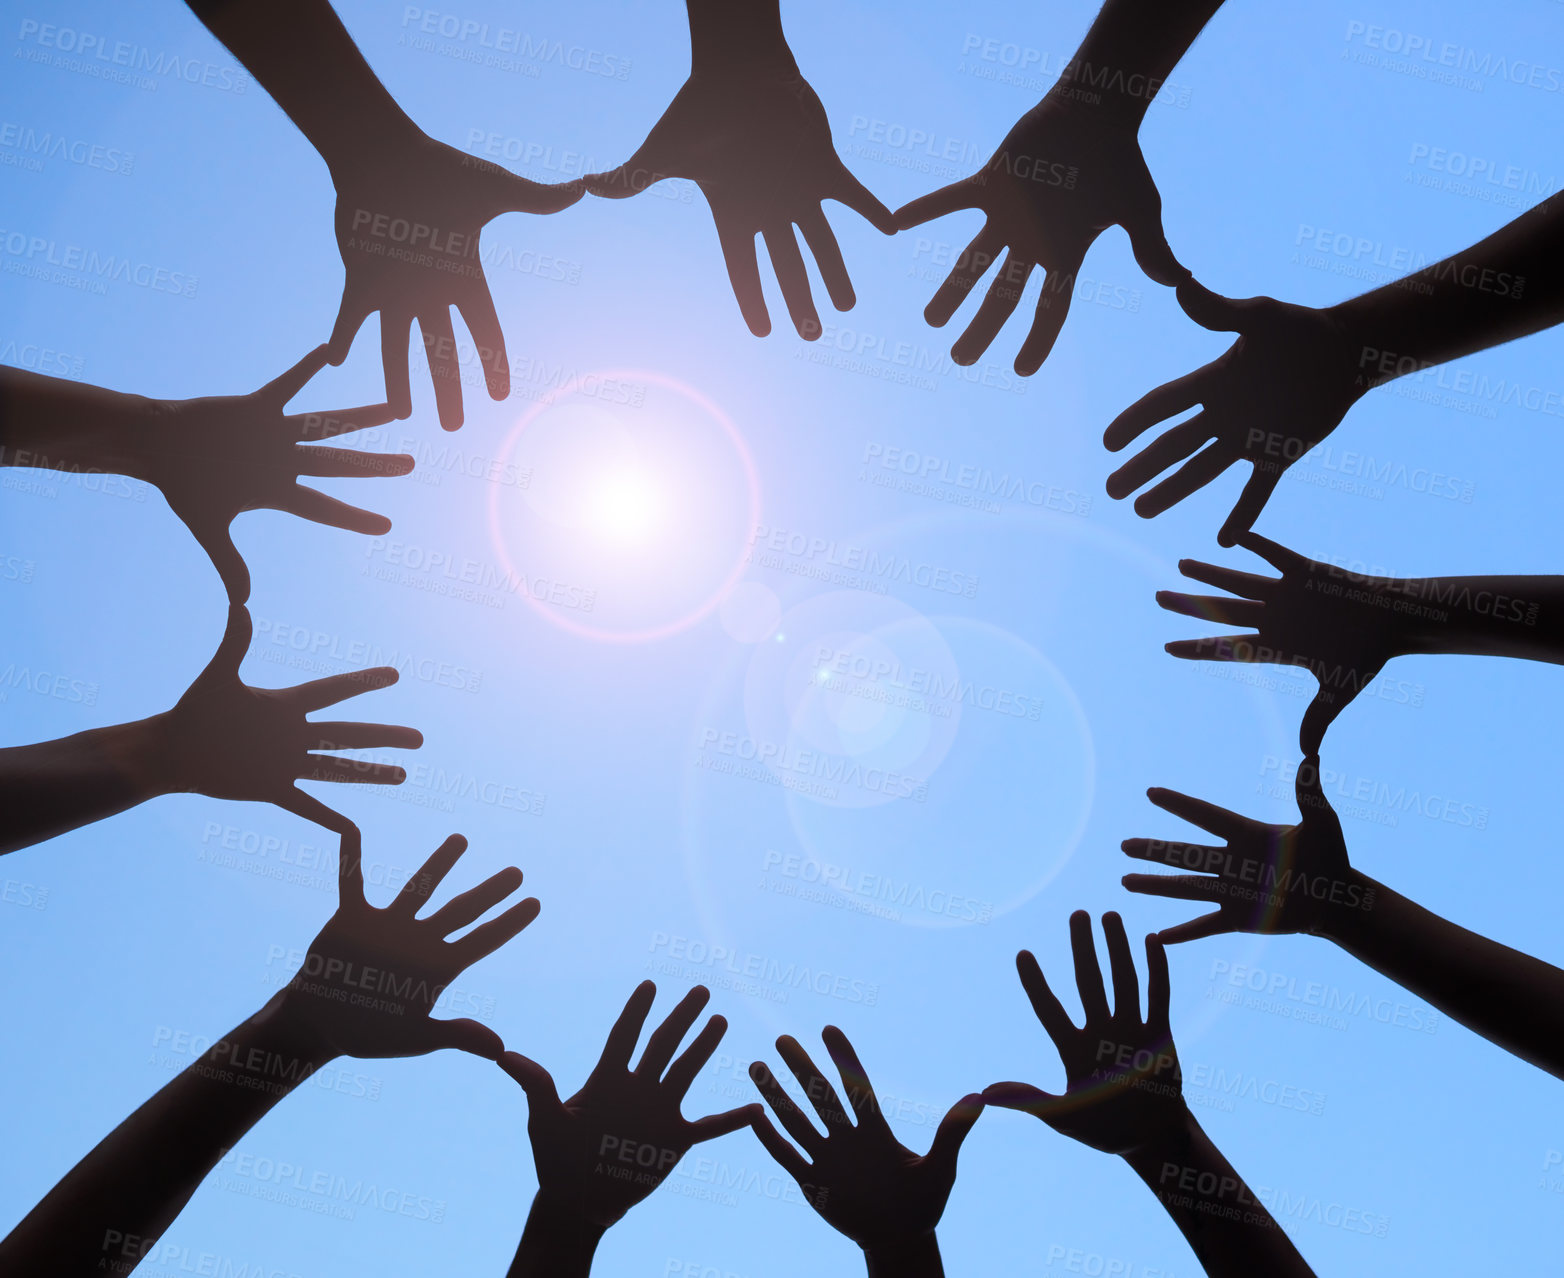 Buy stock photo Shot of a group of hands spread out together in a circle